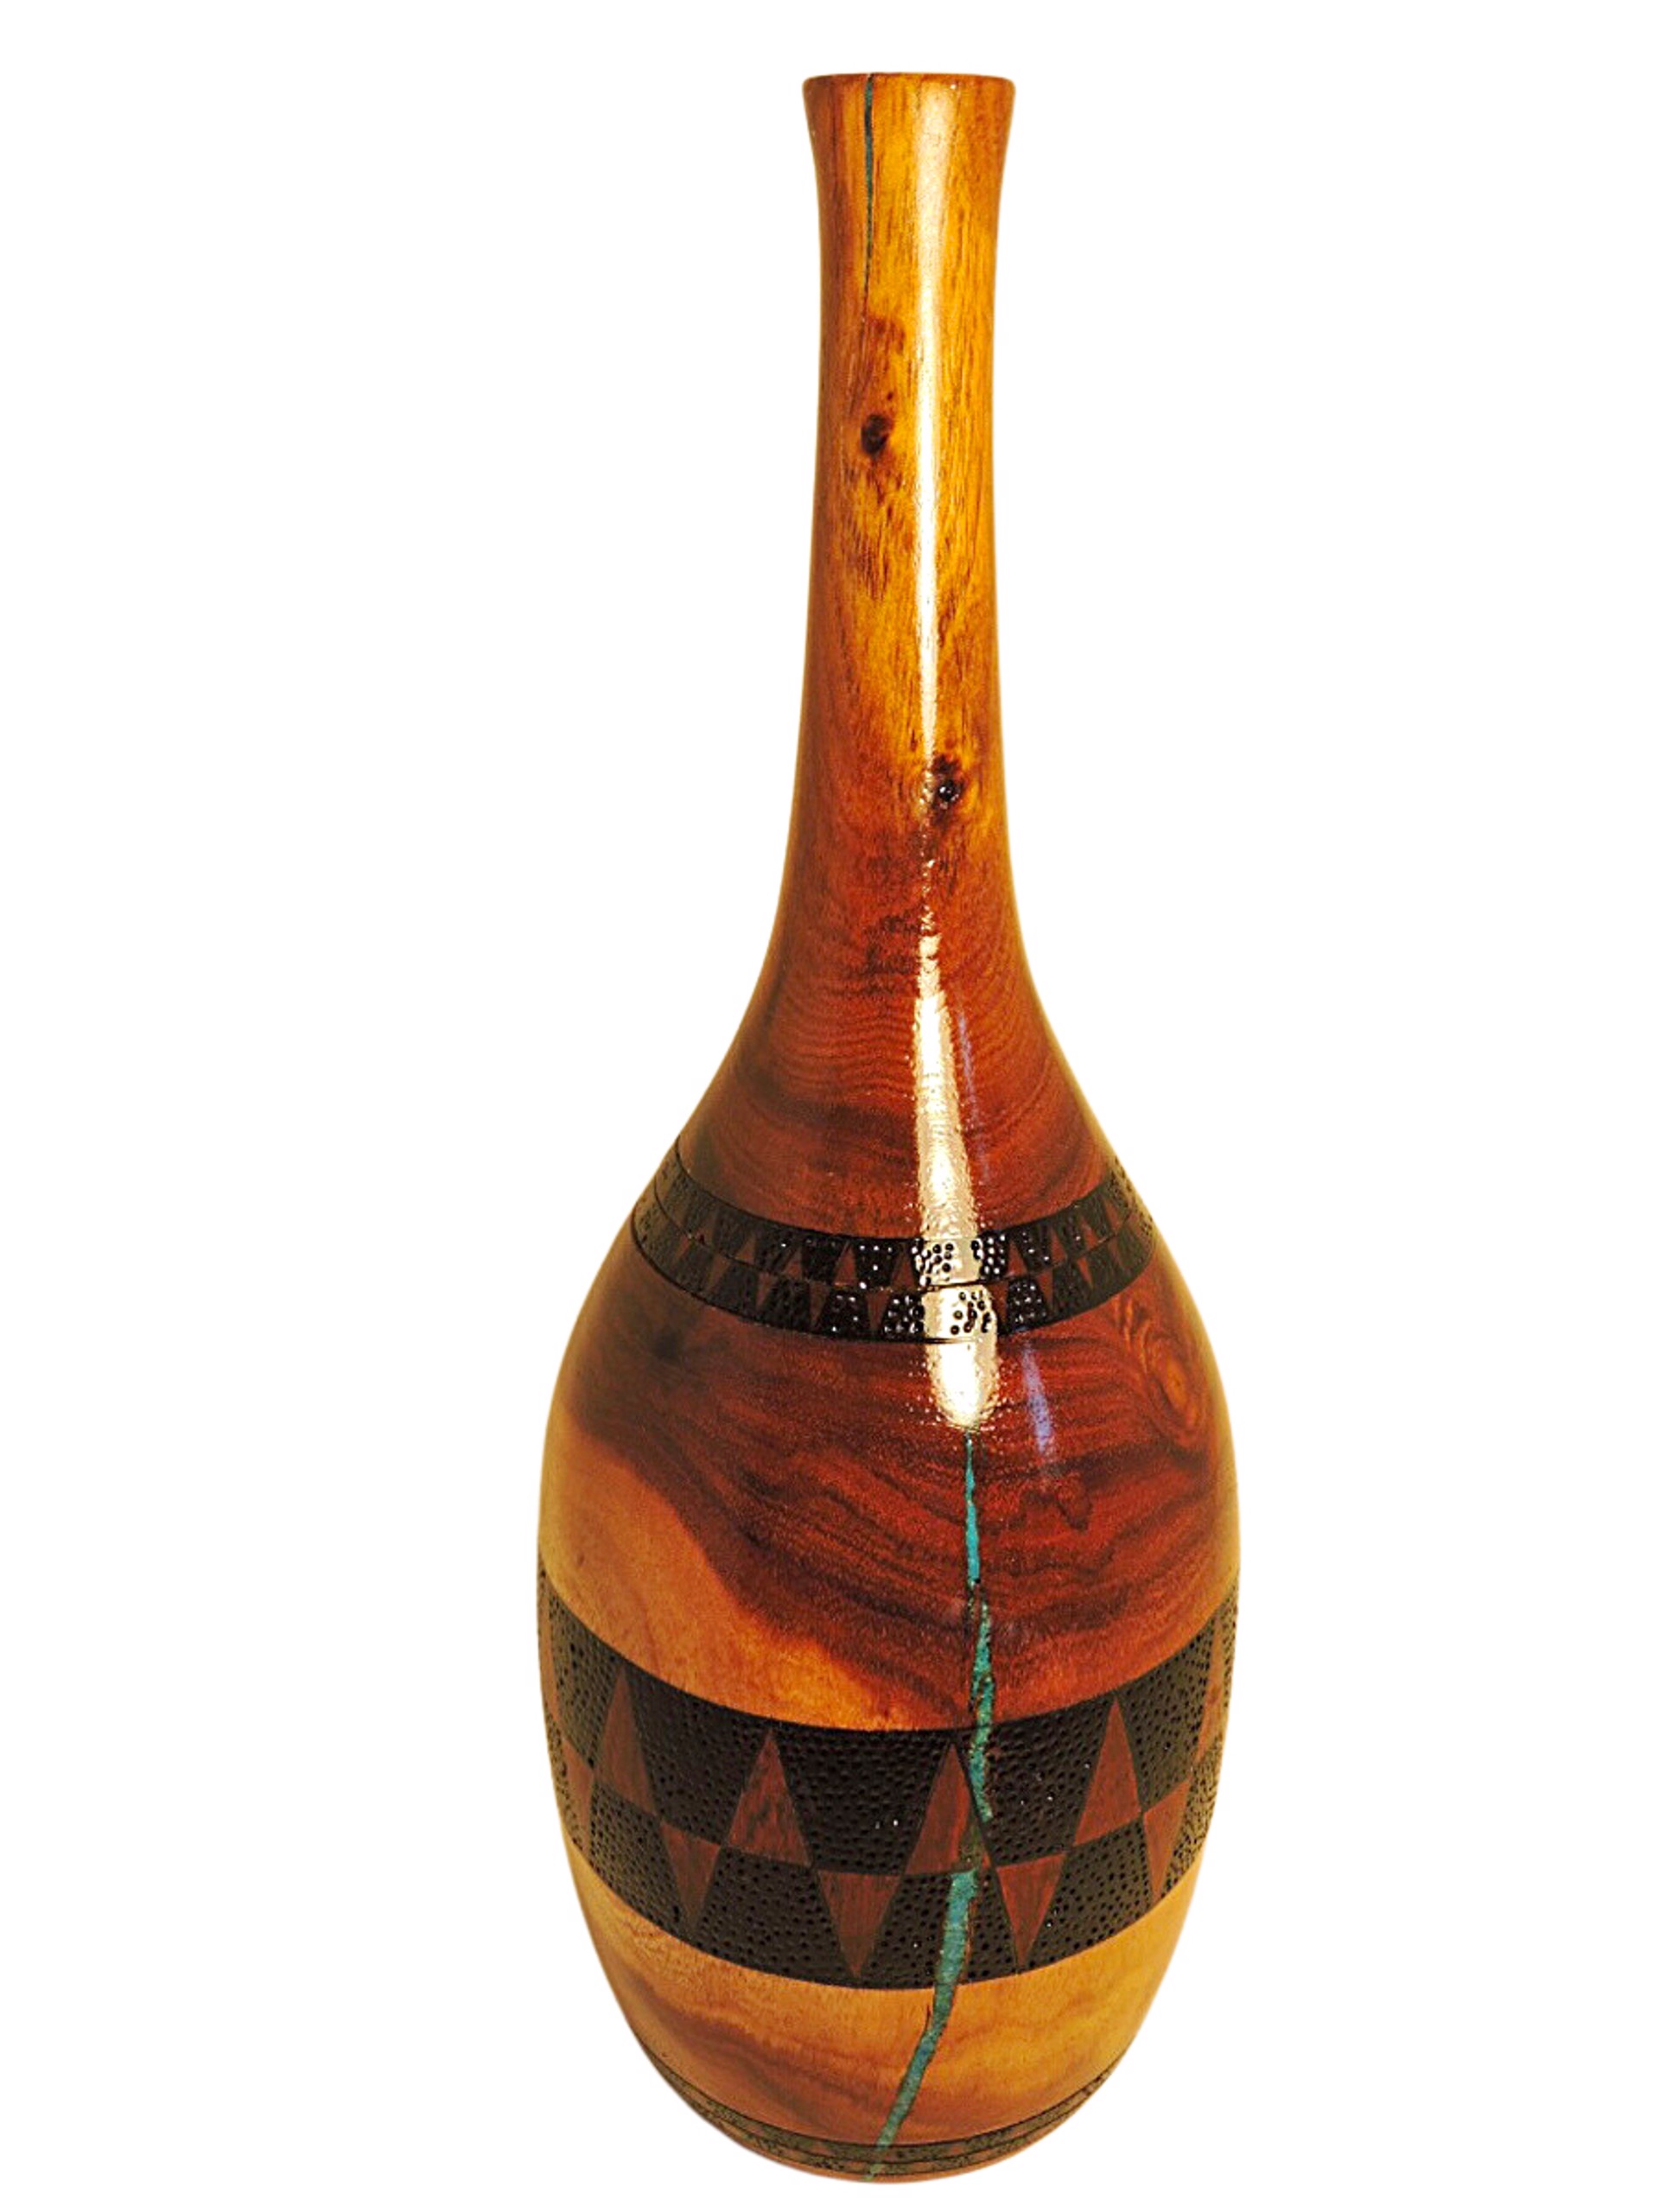 Pine Vase with Turquoise Inlay by Jim Scott